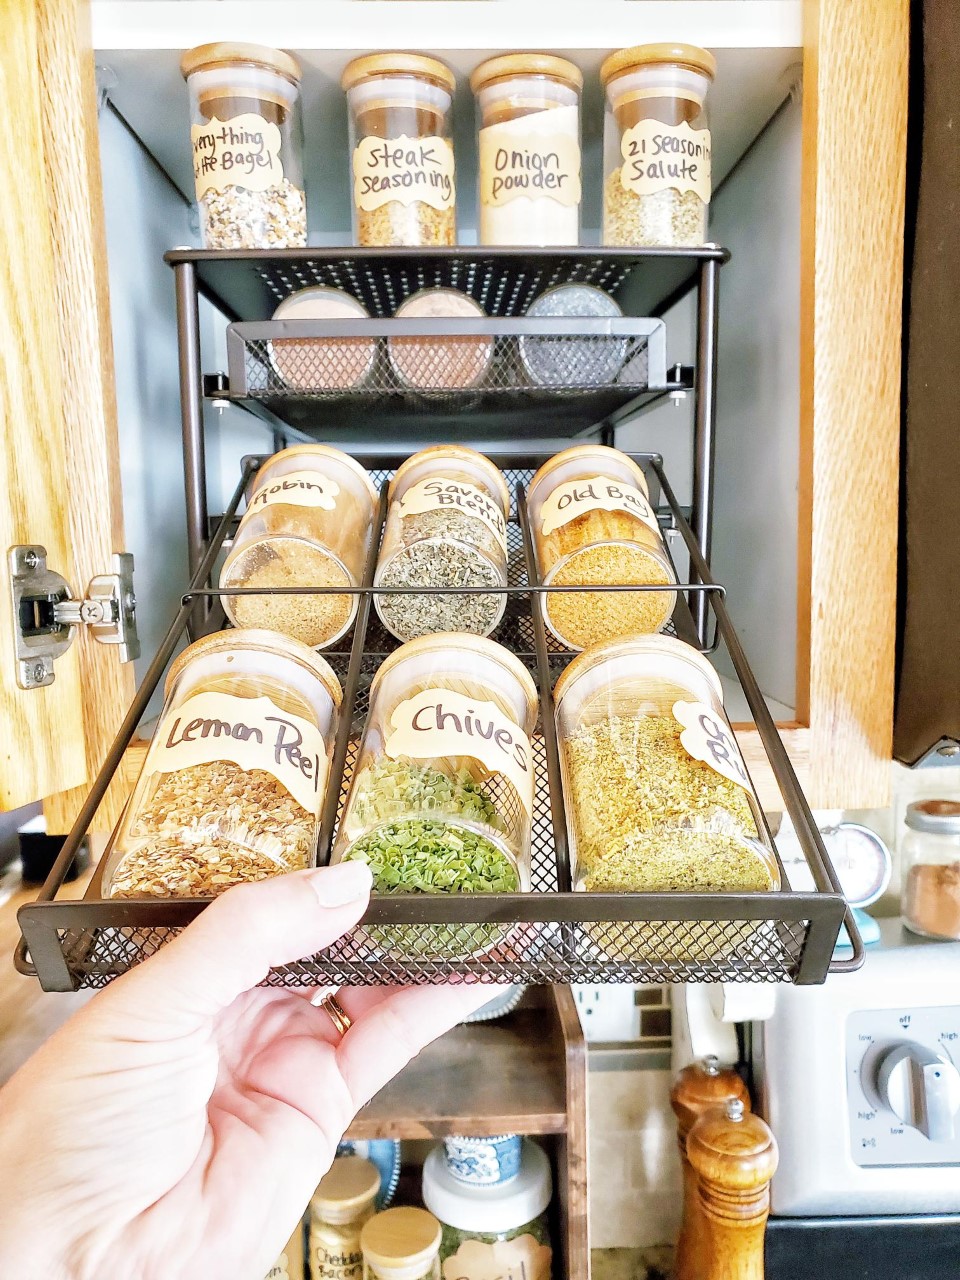 Get Those Spices Organized for Easy Cooking